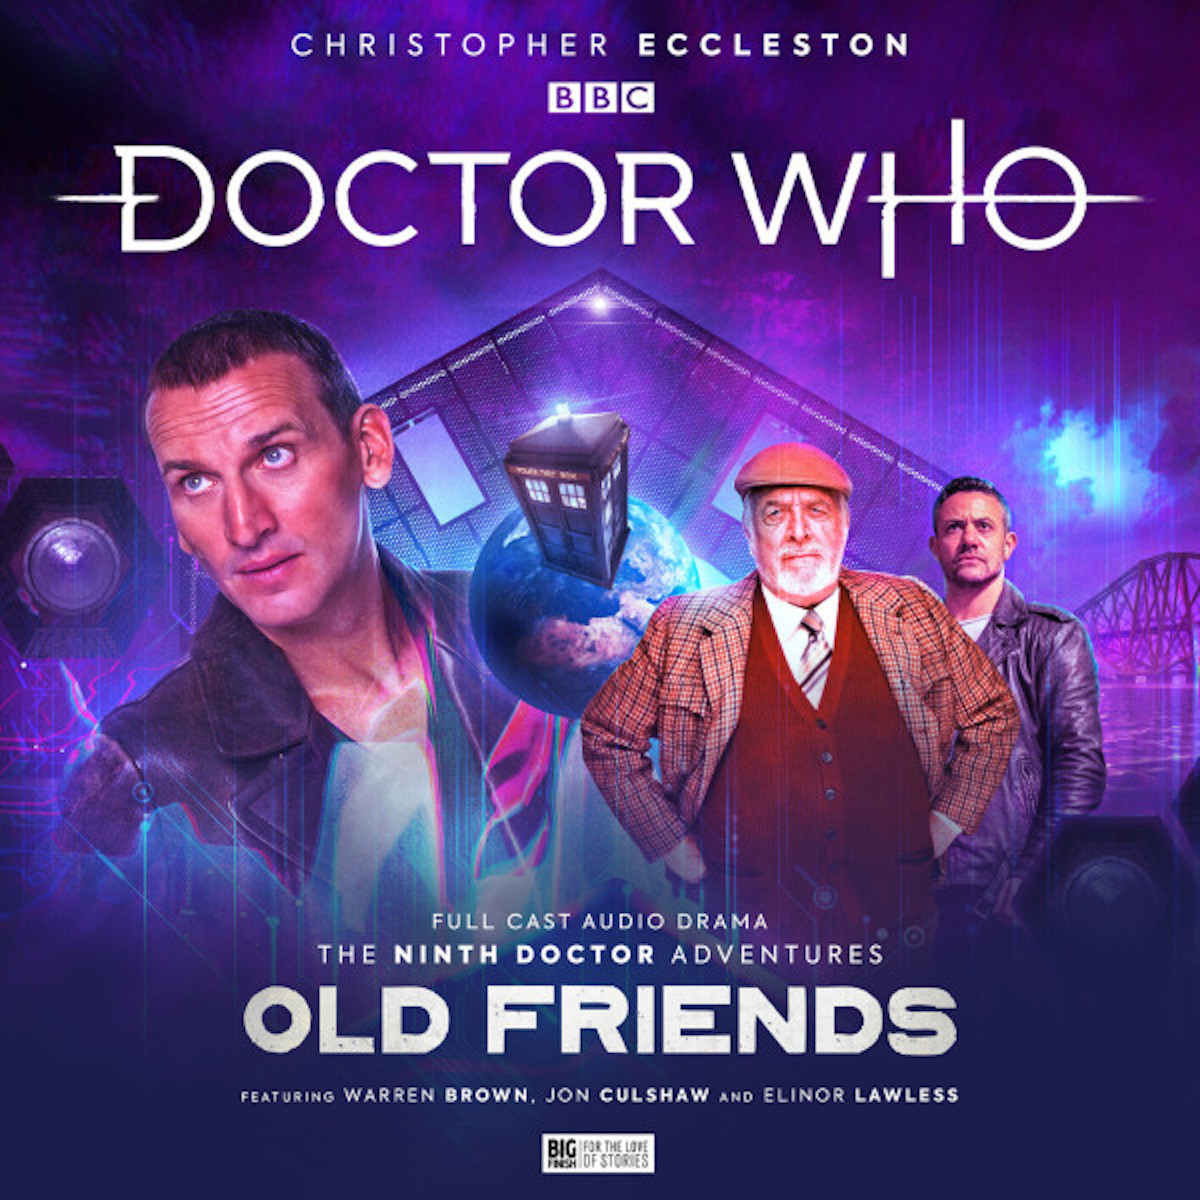 The Ninth Doctor Adventures: Old Friends